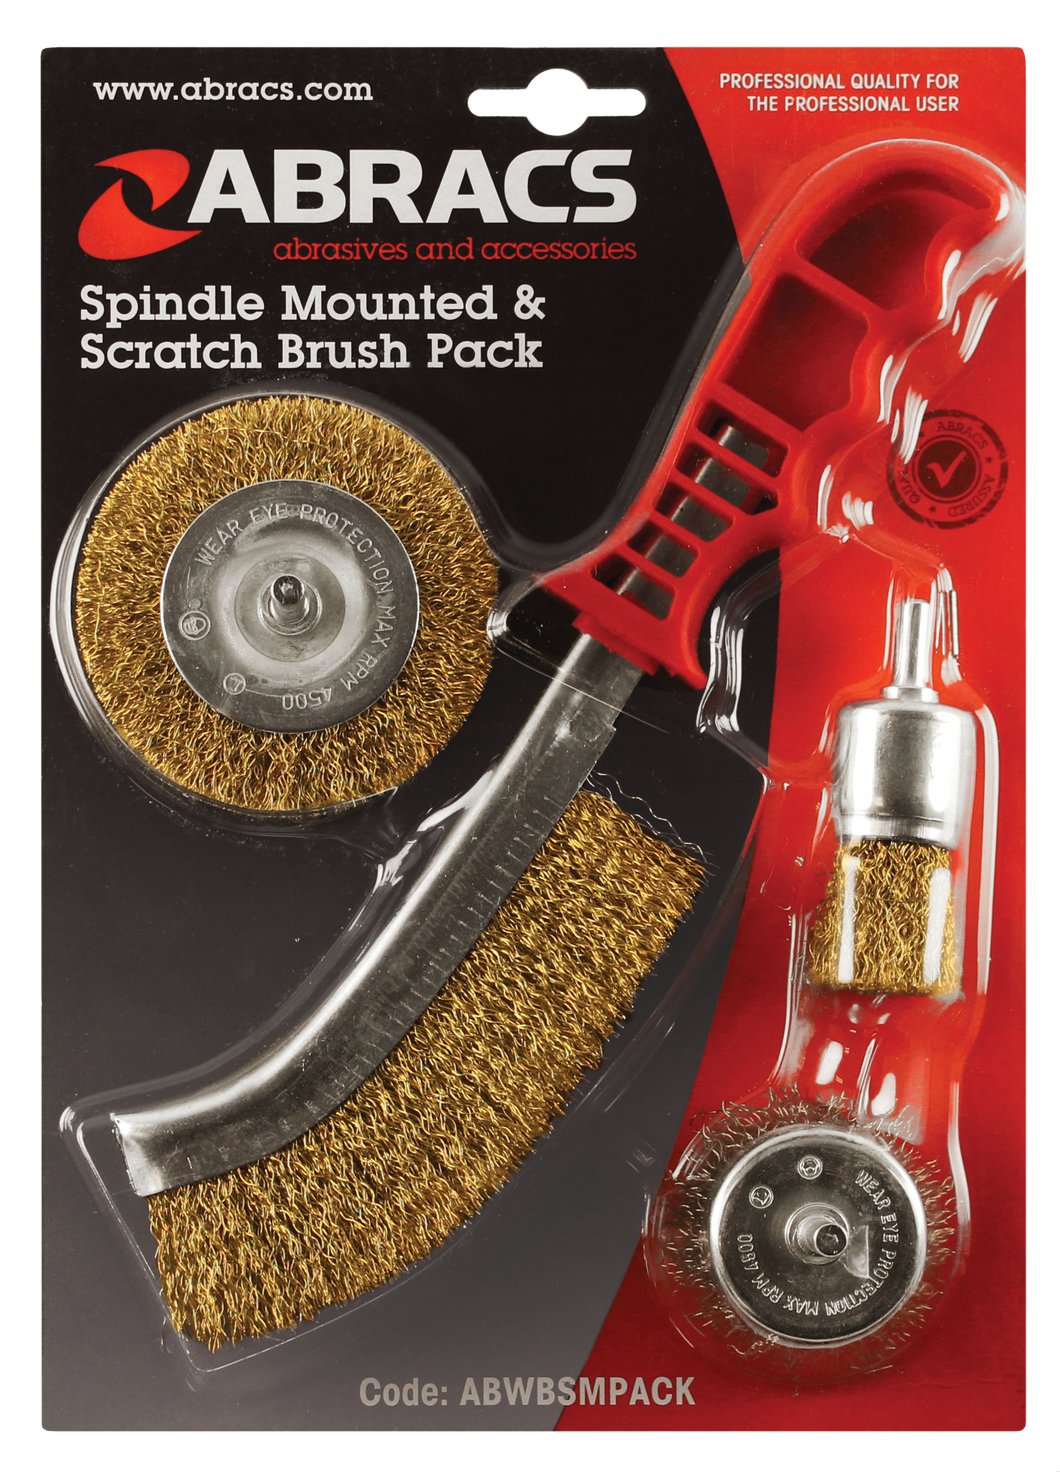 ABWBSMPACK SPINDLE MOUNTED & SCRATCH BRUSH PACK